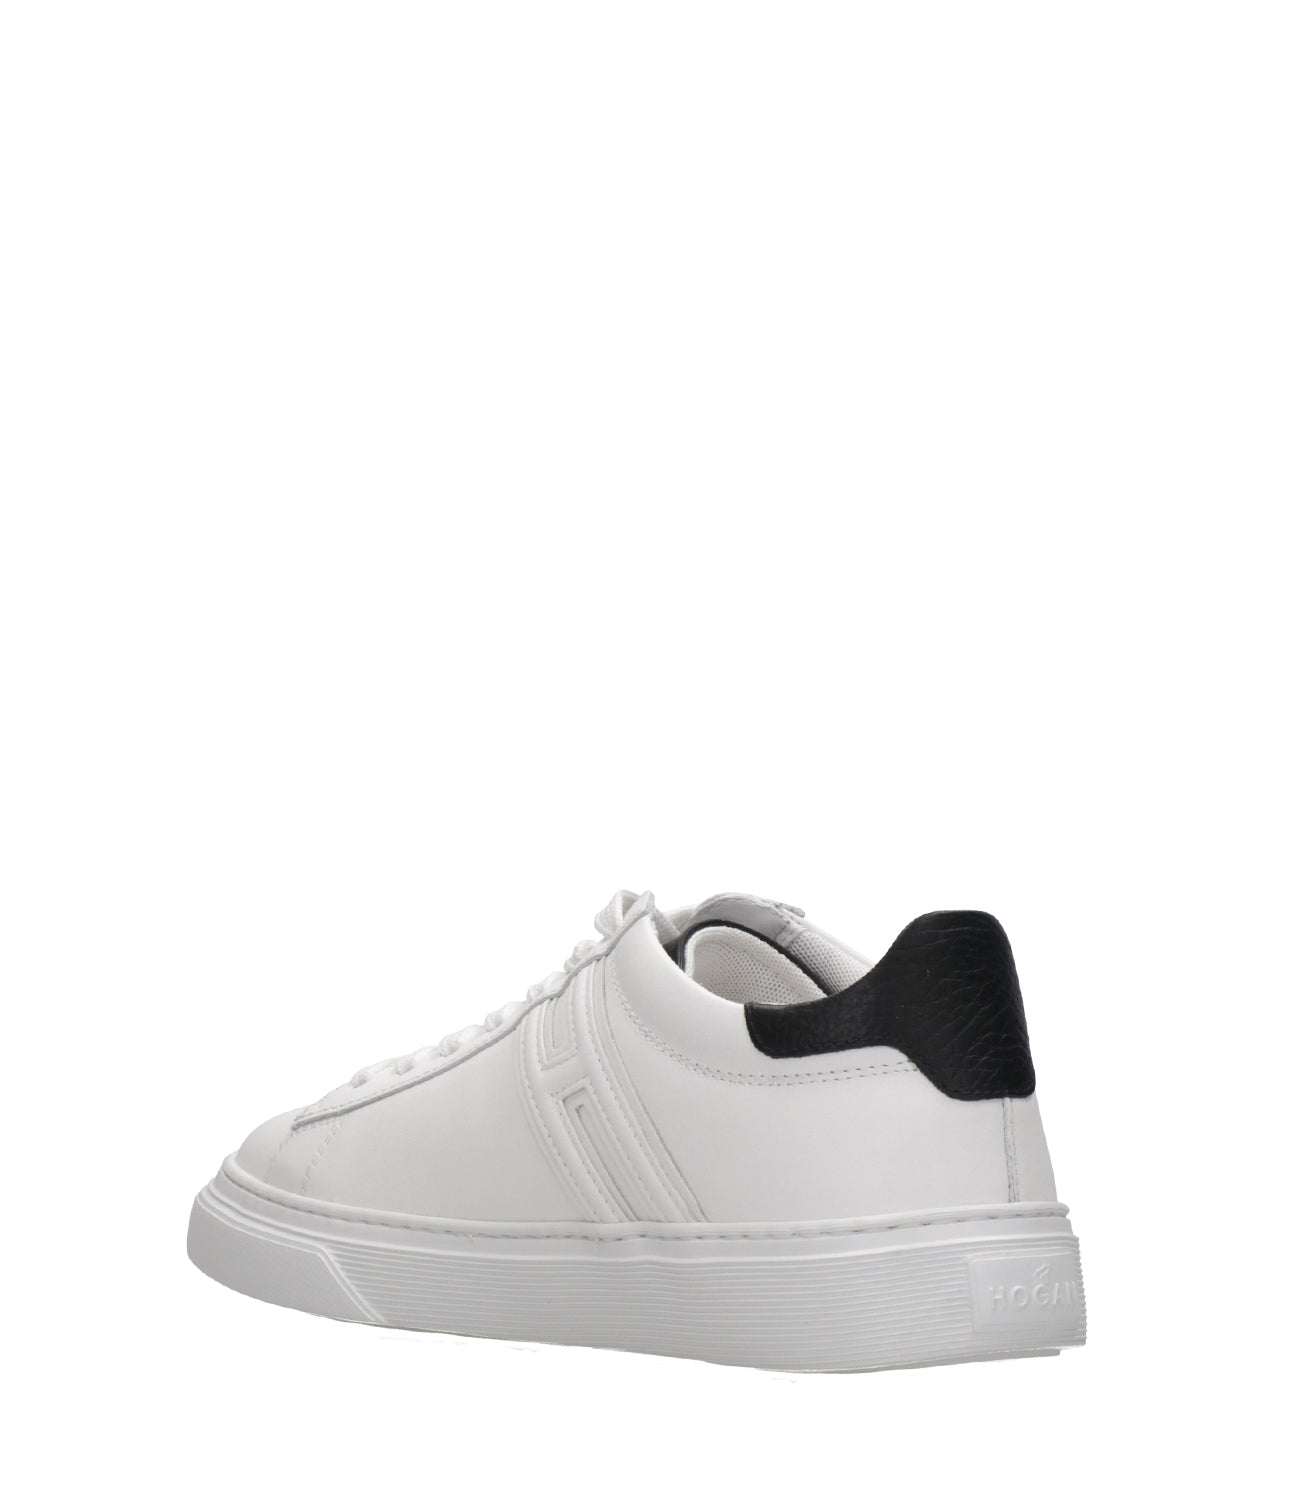 Hogan | Sneakers H365 Black and White